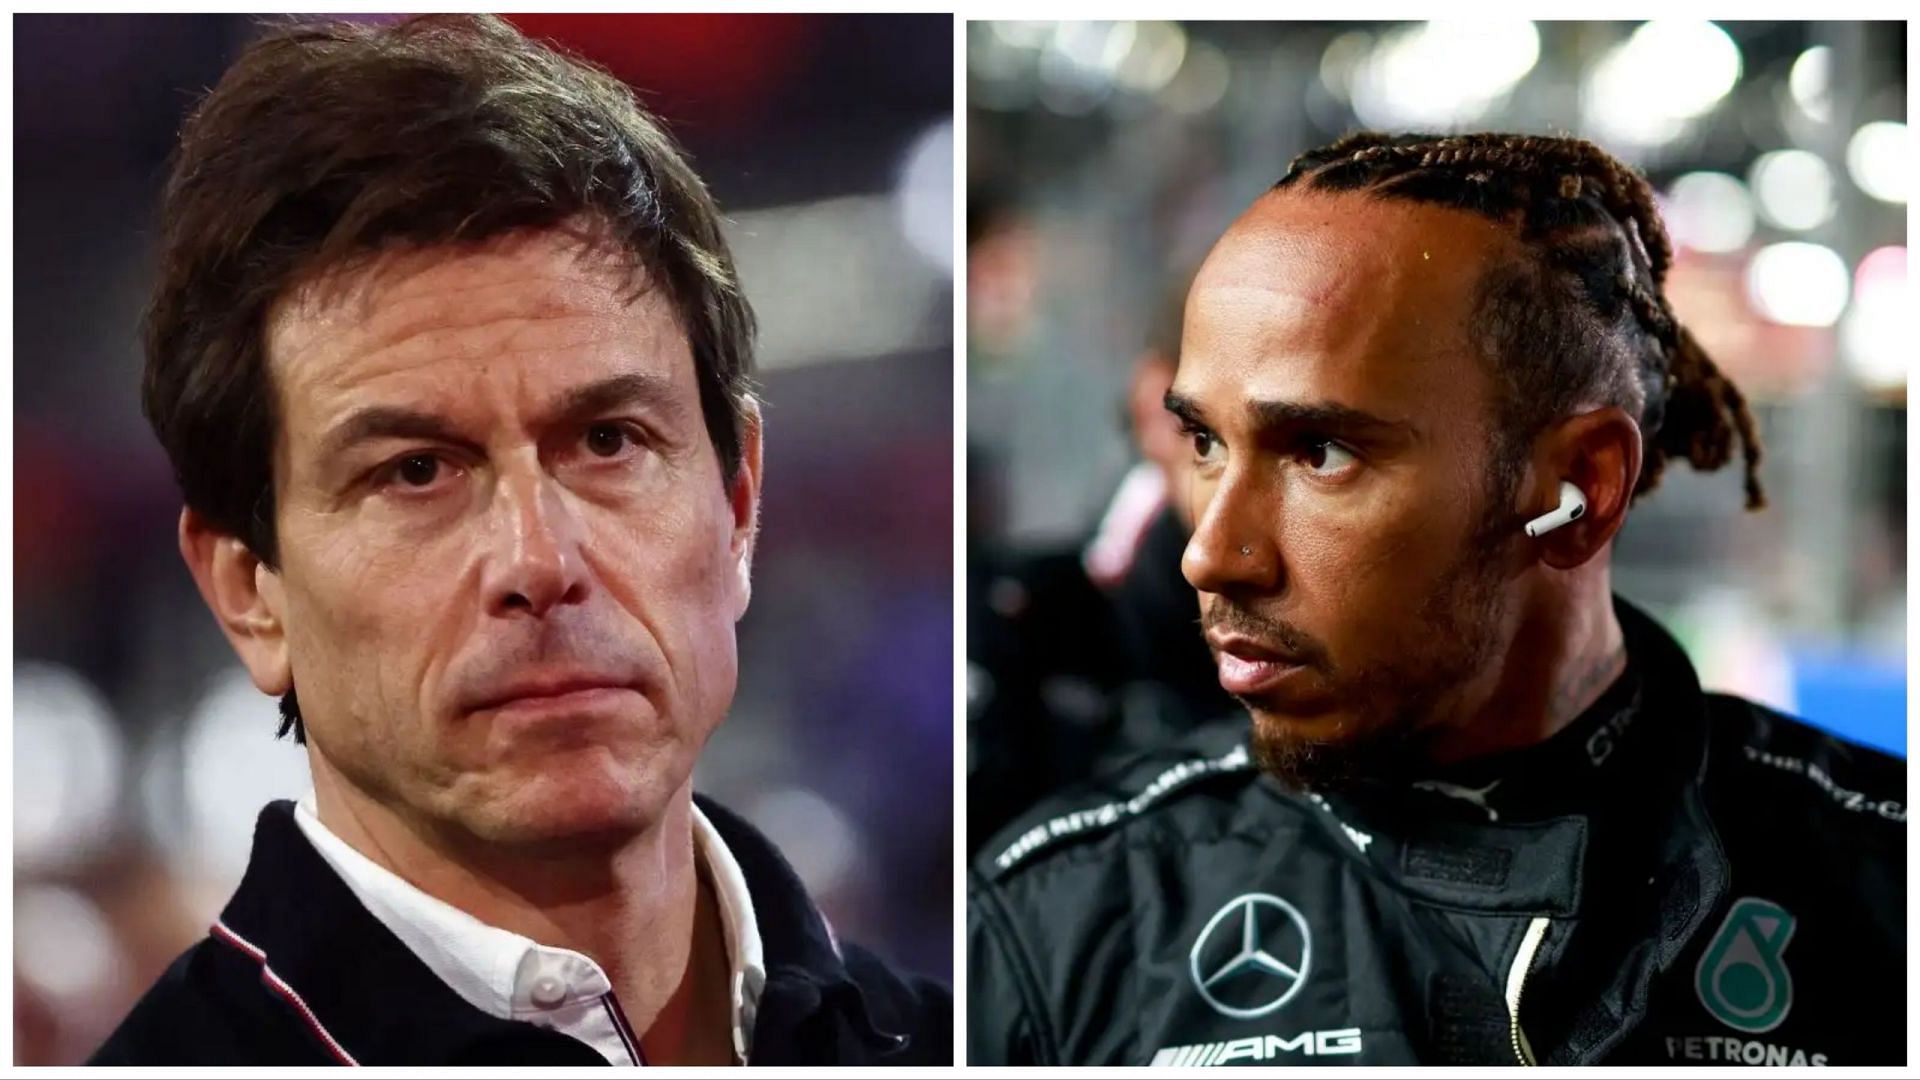 Mercedes team principal Toto Wolff disappointed after Lewis Hamilton